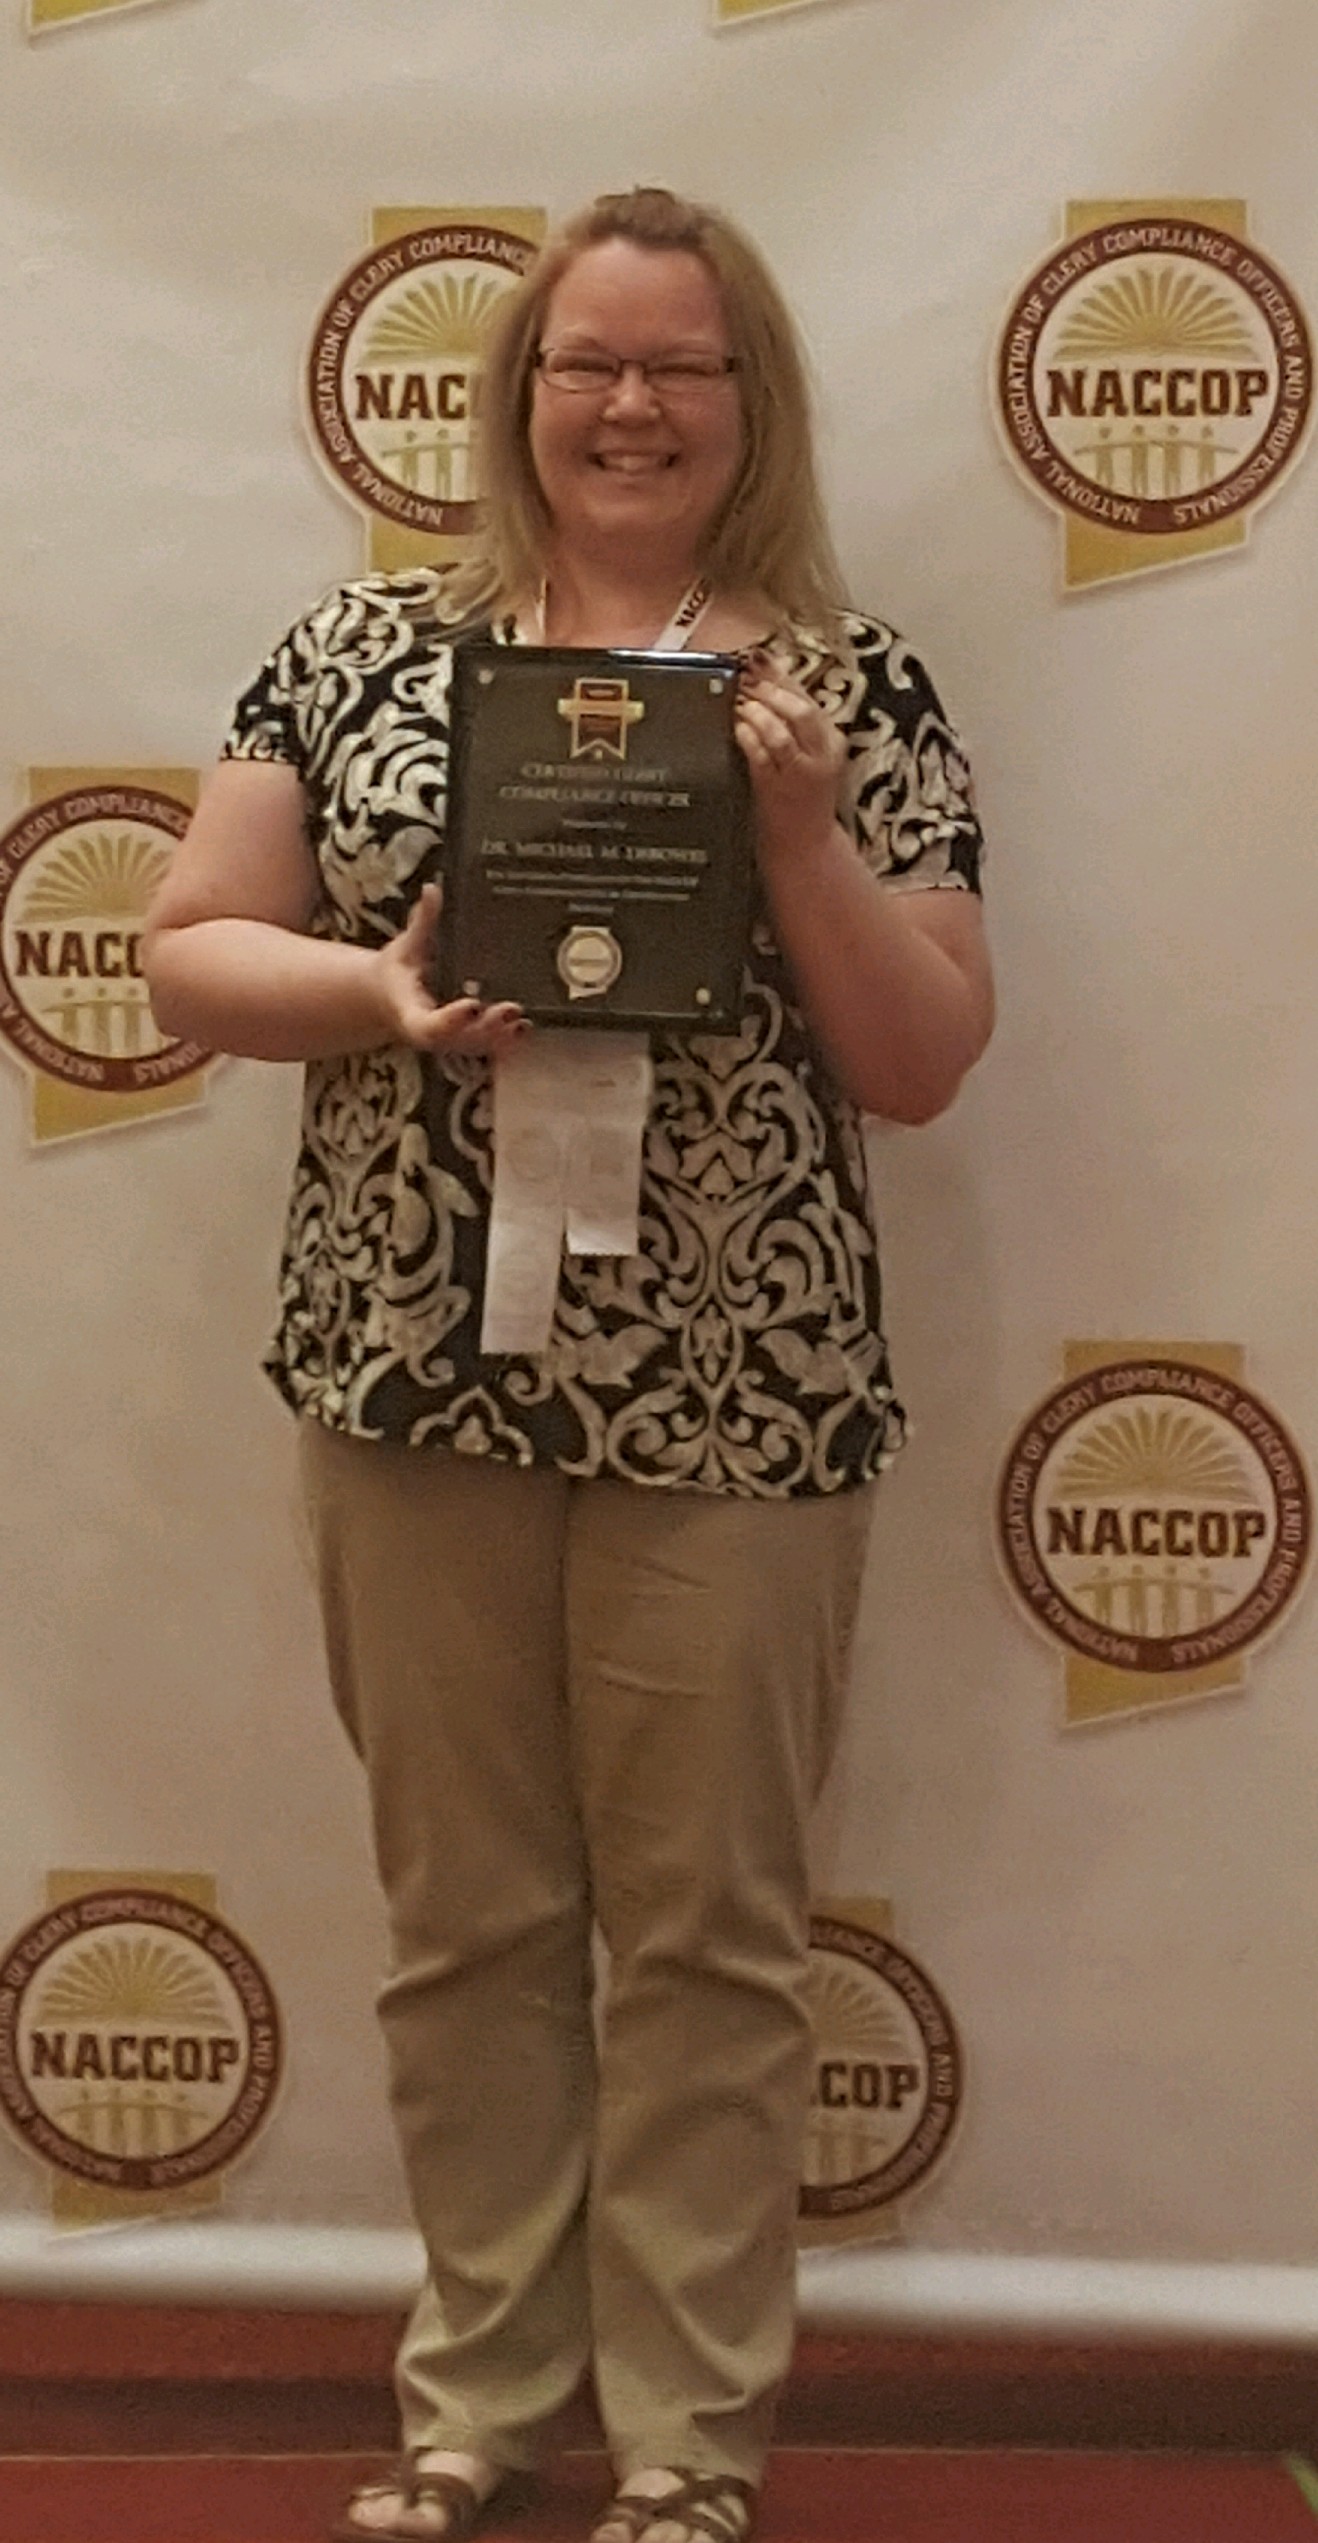 Compliance coordinator Jennifer Payan receiving Clery Compliance Officer certification from the National Association of Clery Compliance Officers and Professionals.